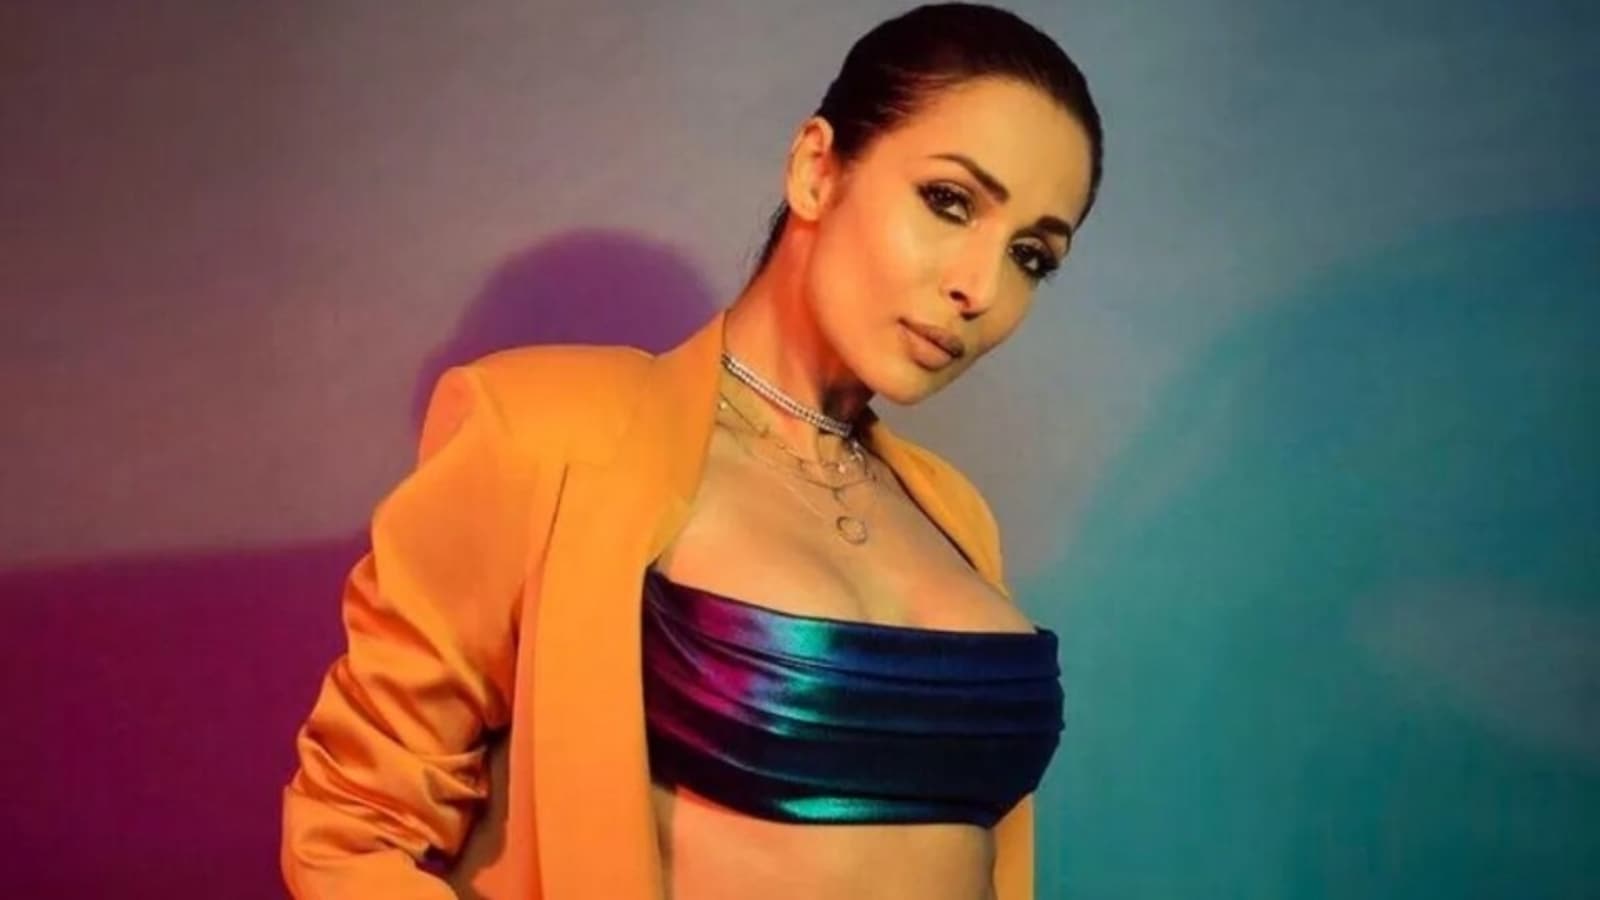 malaika-arora-shimmers-in-bralette-see-through-skirt-and-blazer-for-new-bts-video-from-moving-in-with-malaika-watch